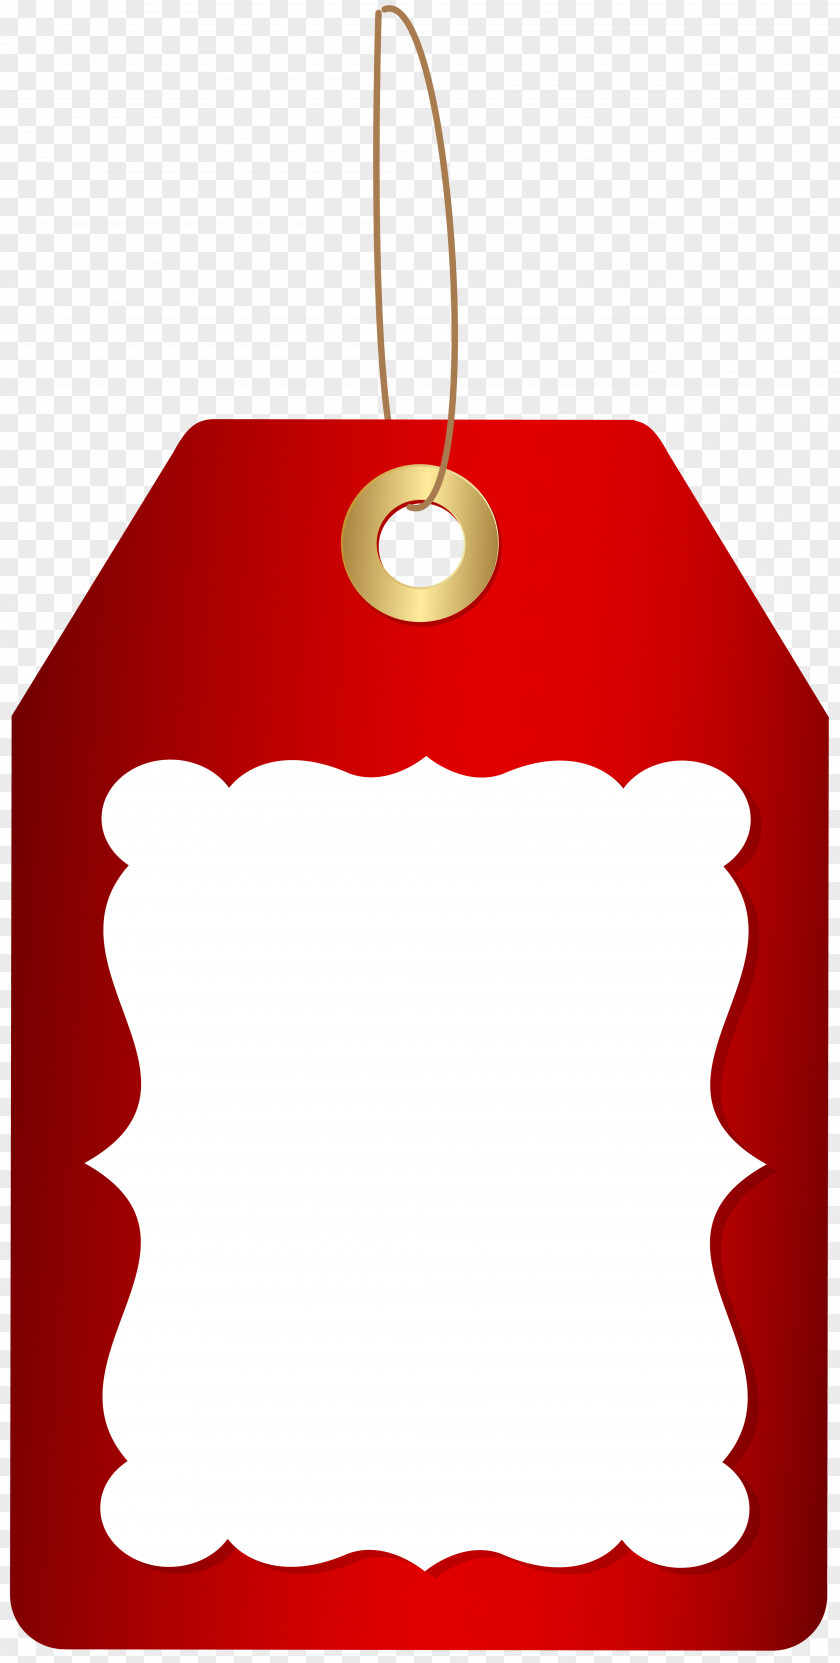 Red Deco Price Tag Clip Art Image PNG